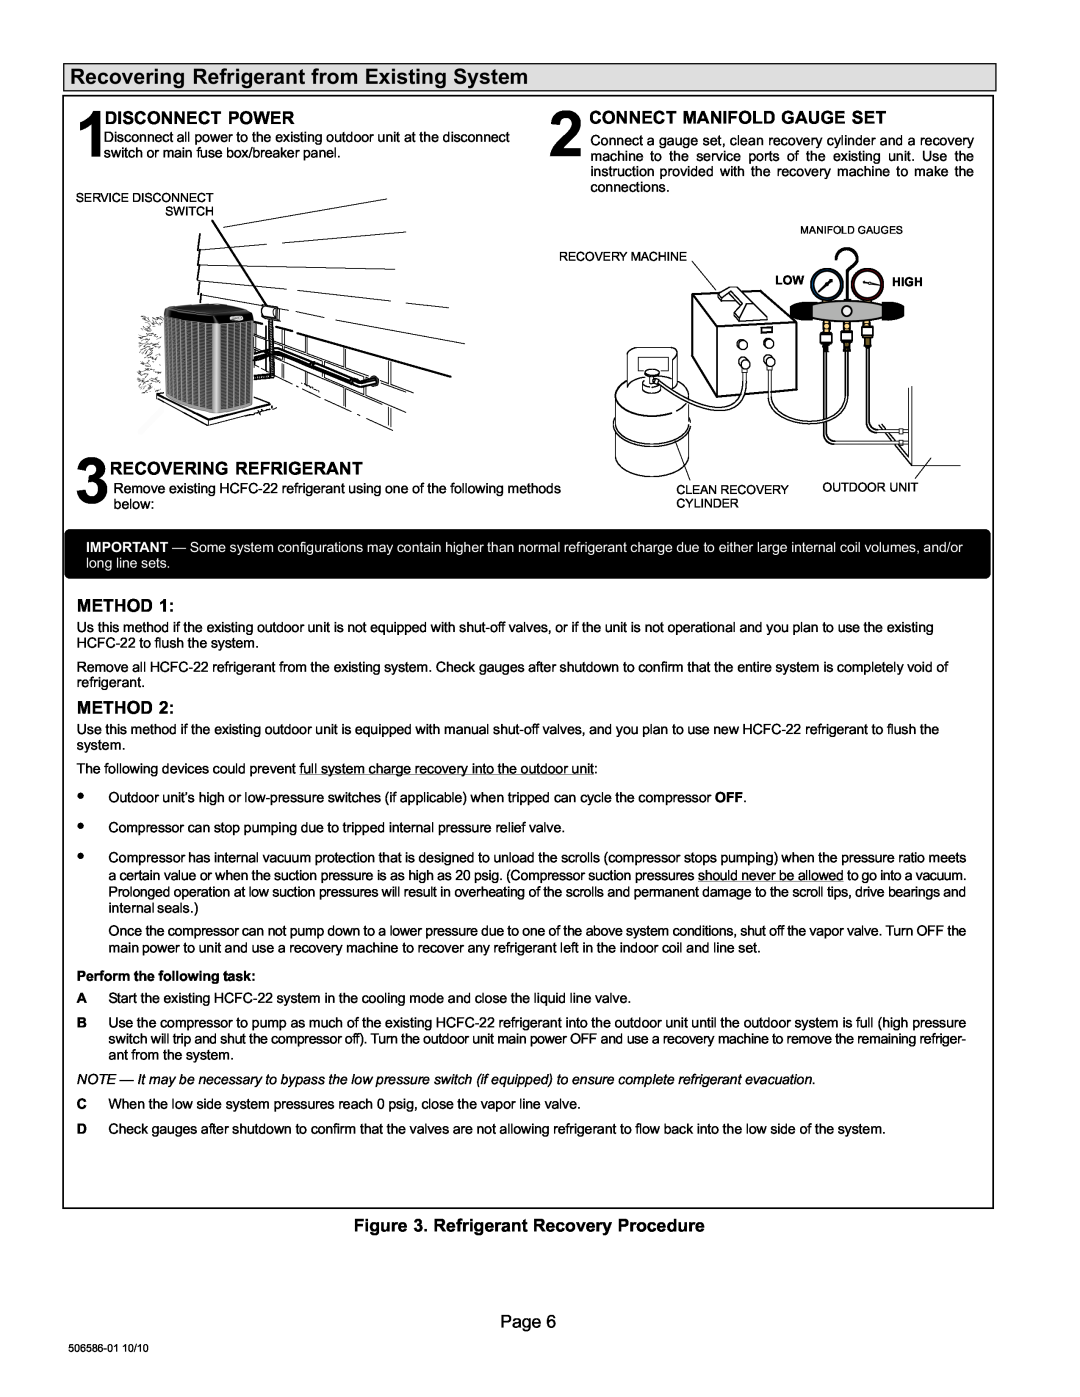 Lennox International Inc 506586-01 installation instructions Recovering Refrigerant from Existing System, long line sets 